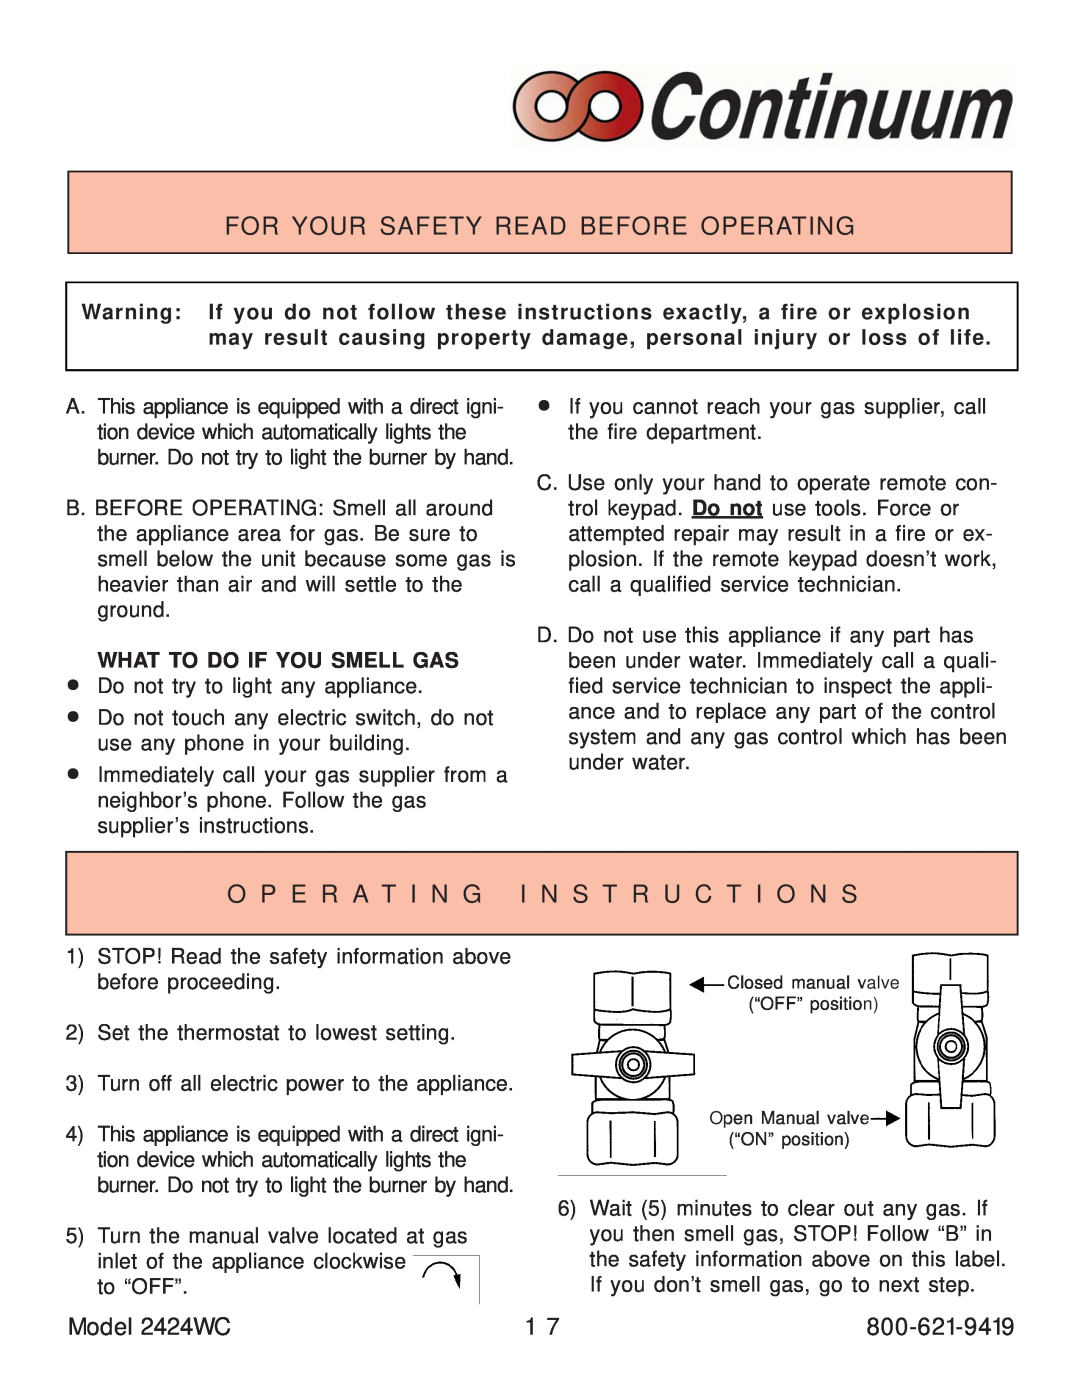 Rinnai manual For Your Safety Read Before Operating, O P E R A T I N G I N S T R U C T I O N S, Model 2424WC 